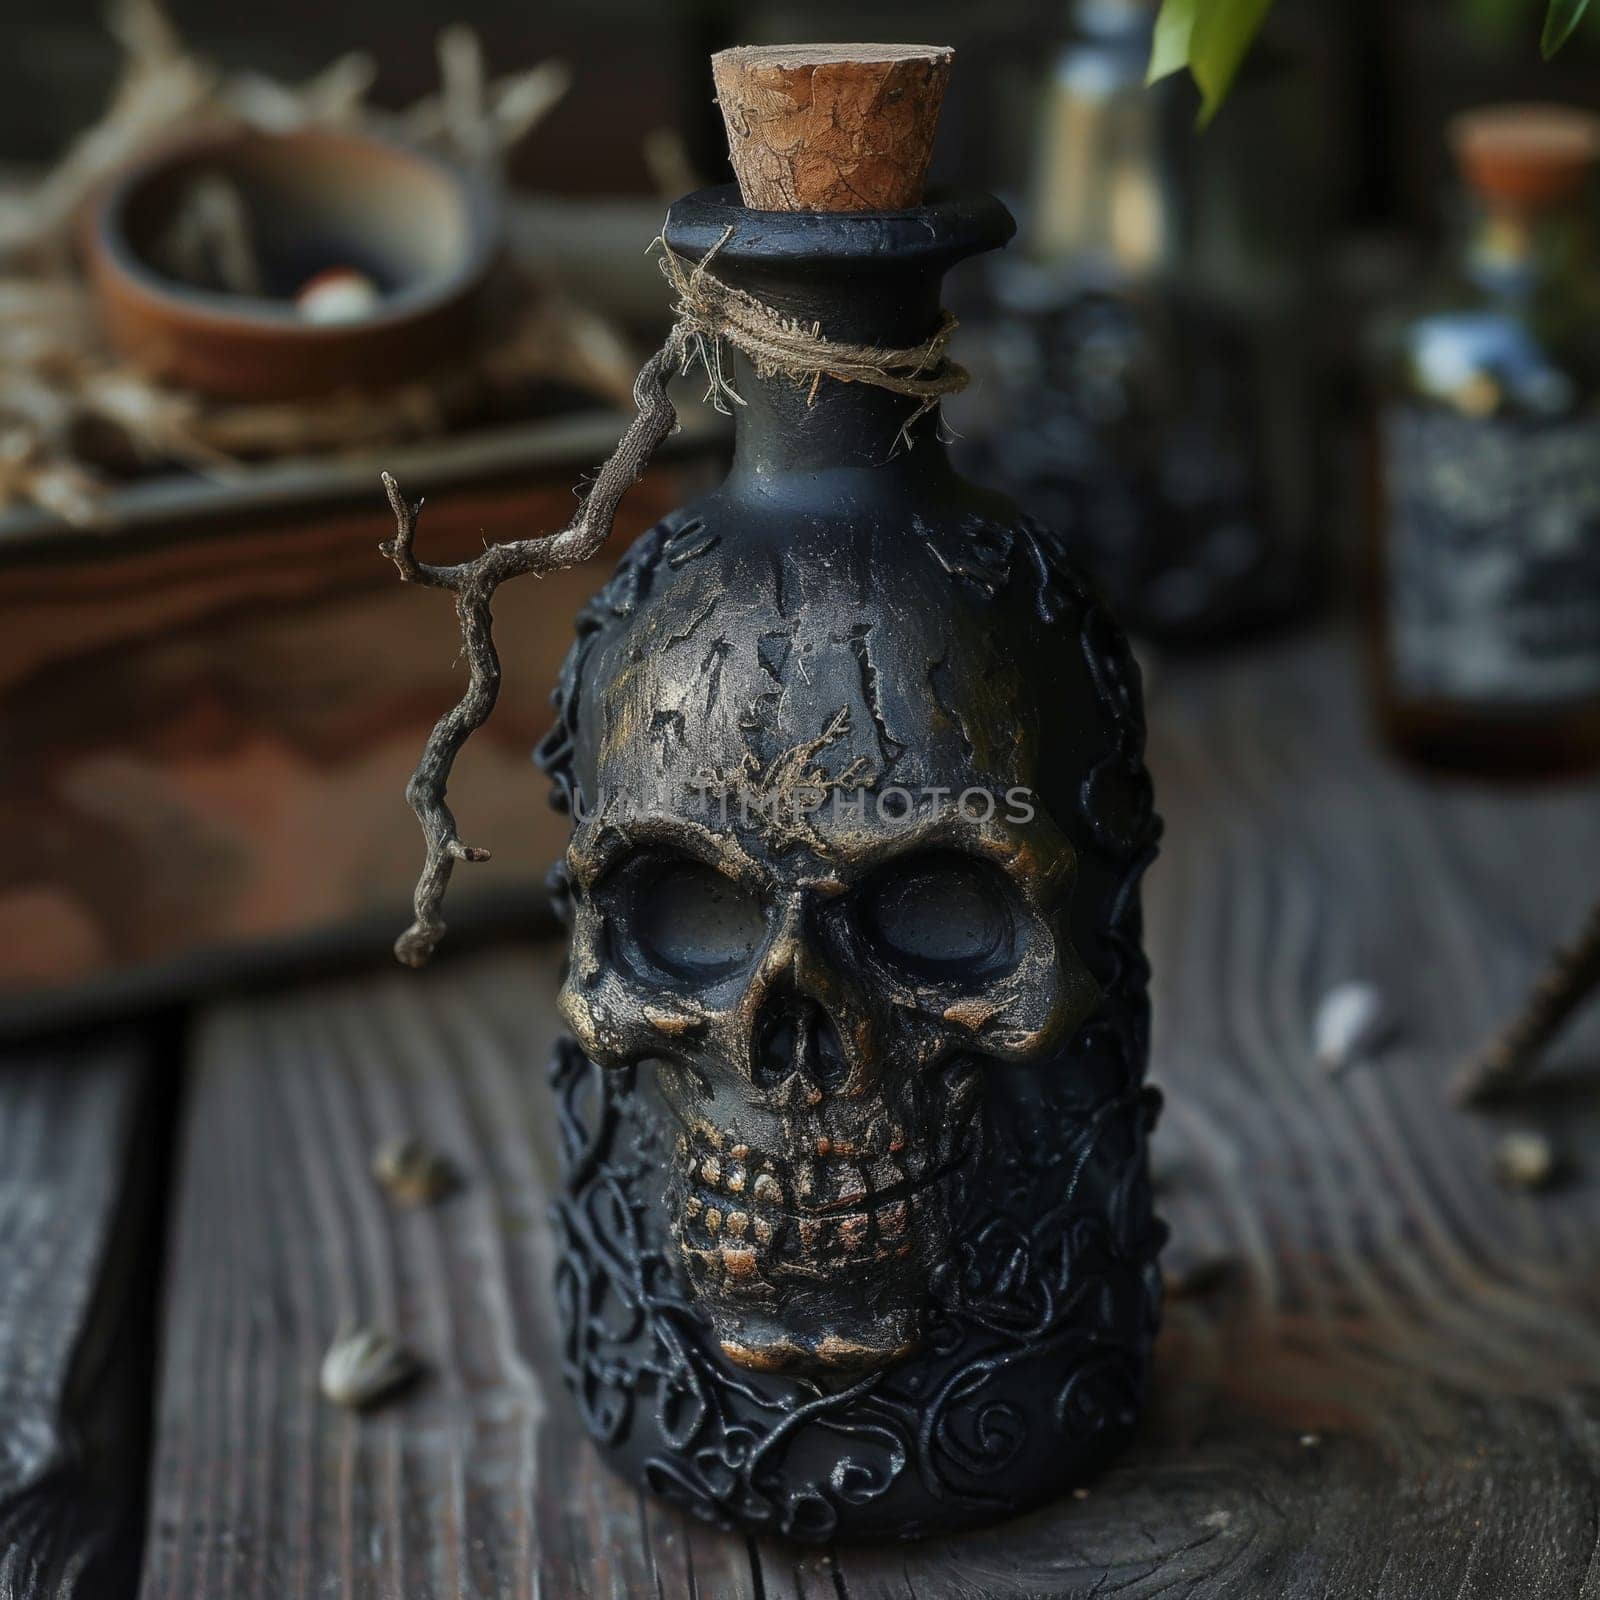 Decorative black skull-shaped bottle with a cork, set against a rustic backdrop